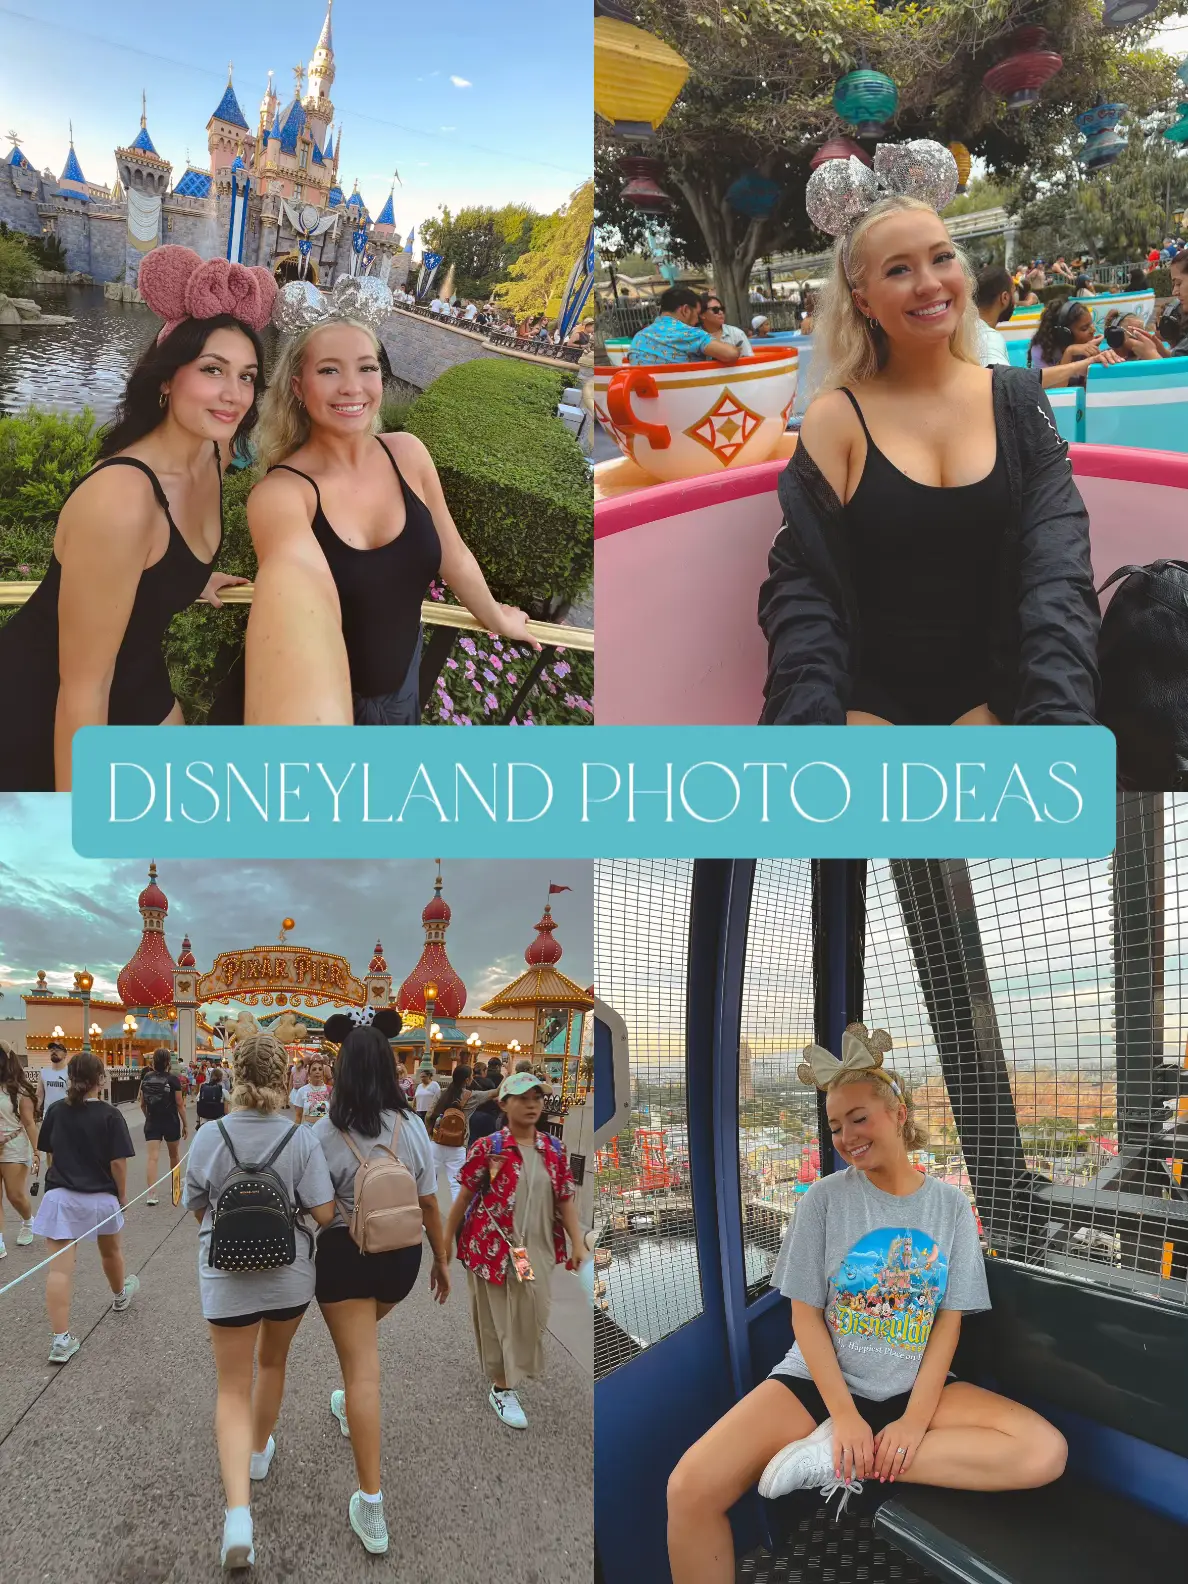  A collage of photos of people at Disneyland.